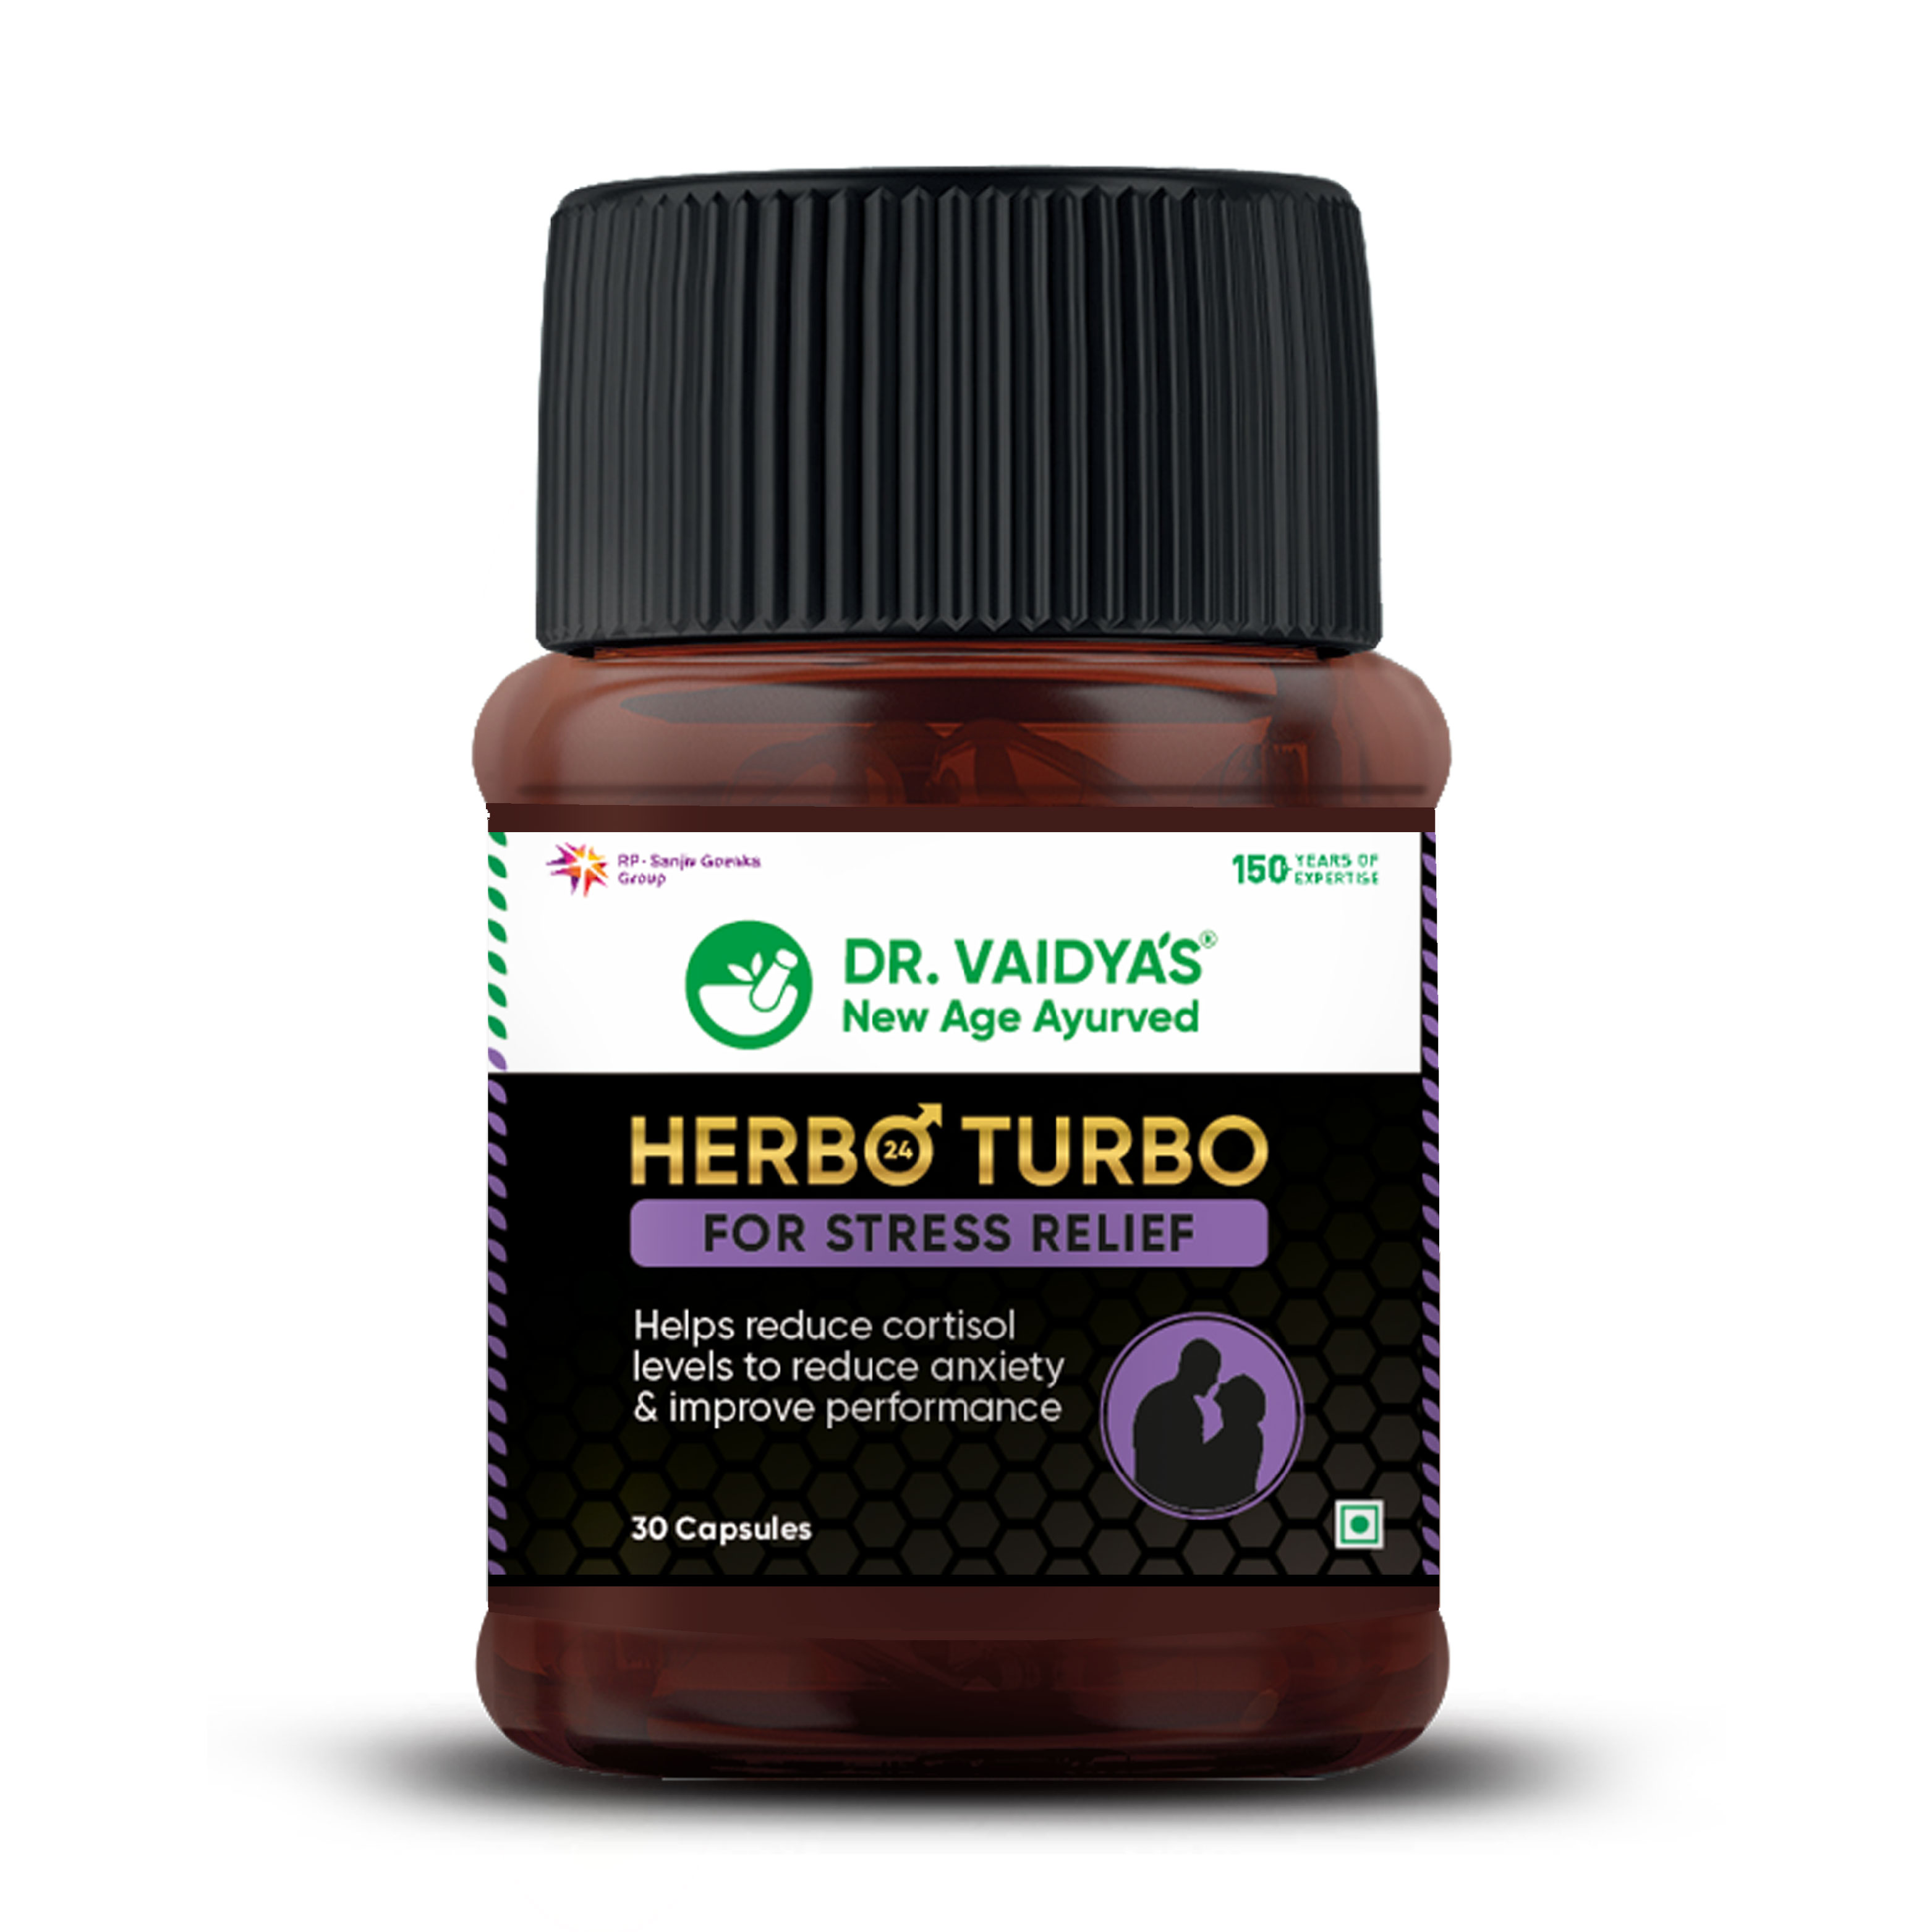 Buy Dr Vaidya's Herbo24Turbo Made For Stress Relief at Best Price Online